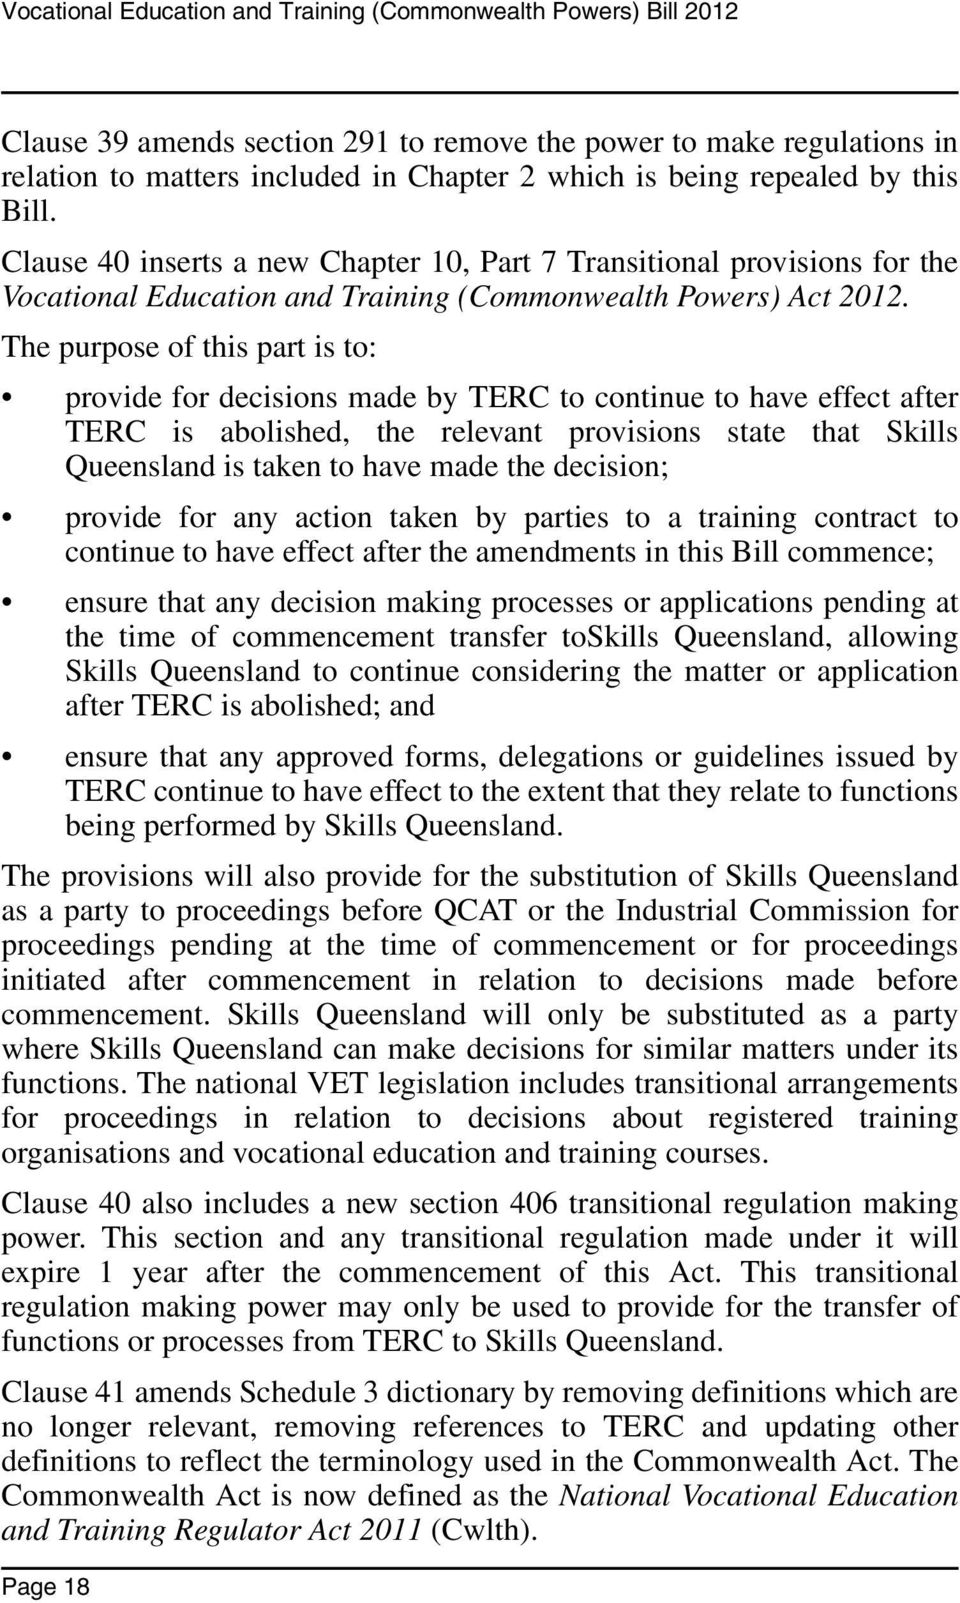 The purpose of this part is to: provide for decisions made by TERC to continue to have effect after TERC is abolished, the relevant provisions state that Skills Queensland is taken to have made the